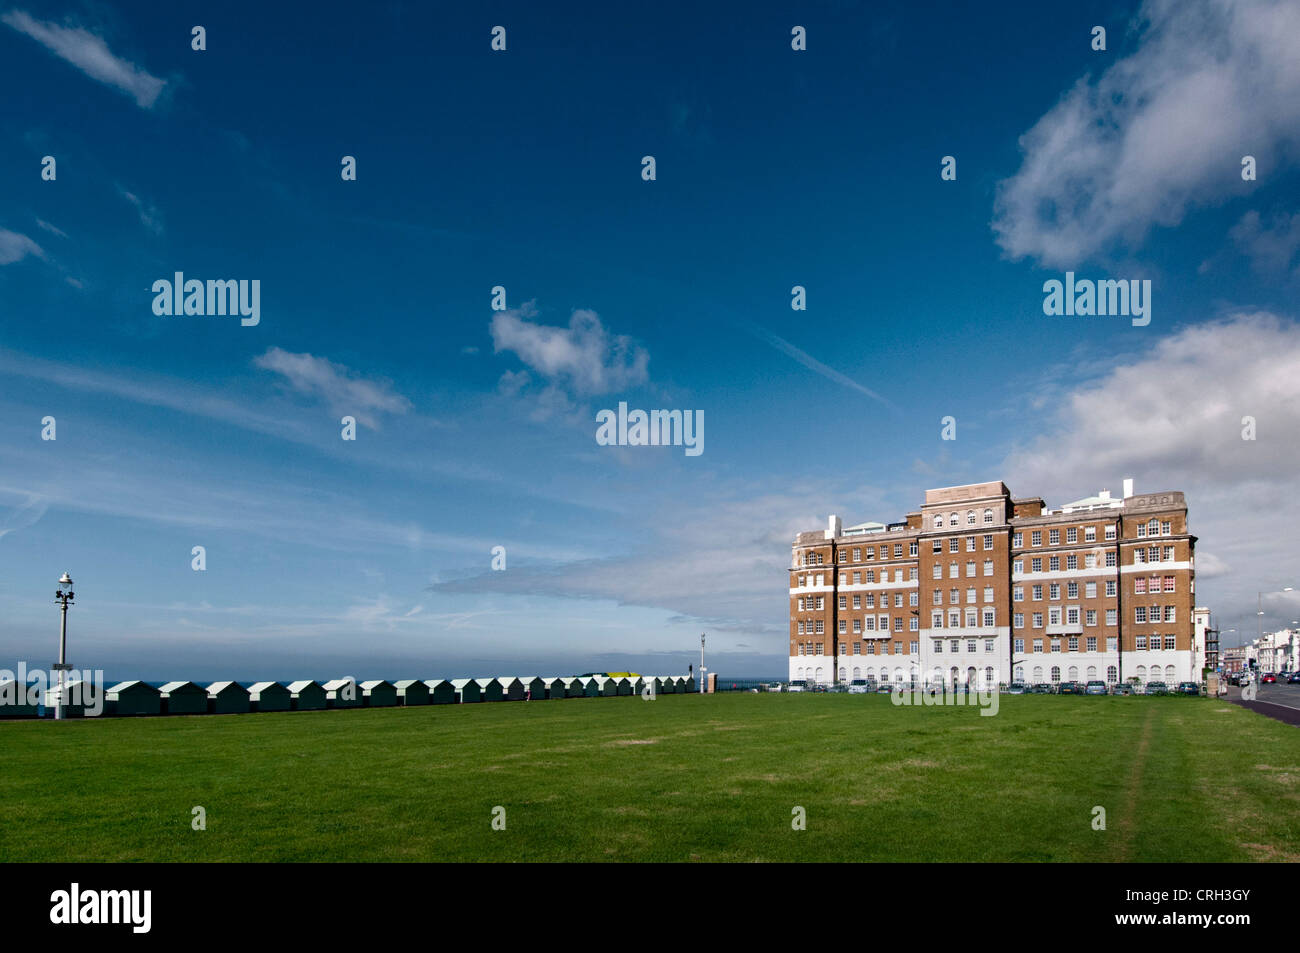 Hove Lawns in Hove, East Sussex. Stock Photo